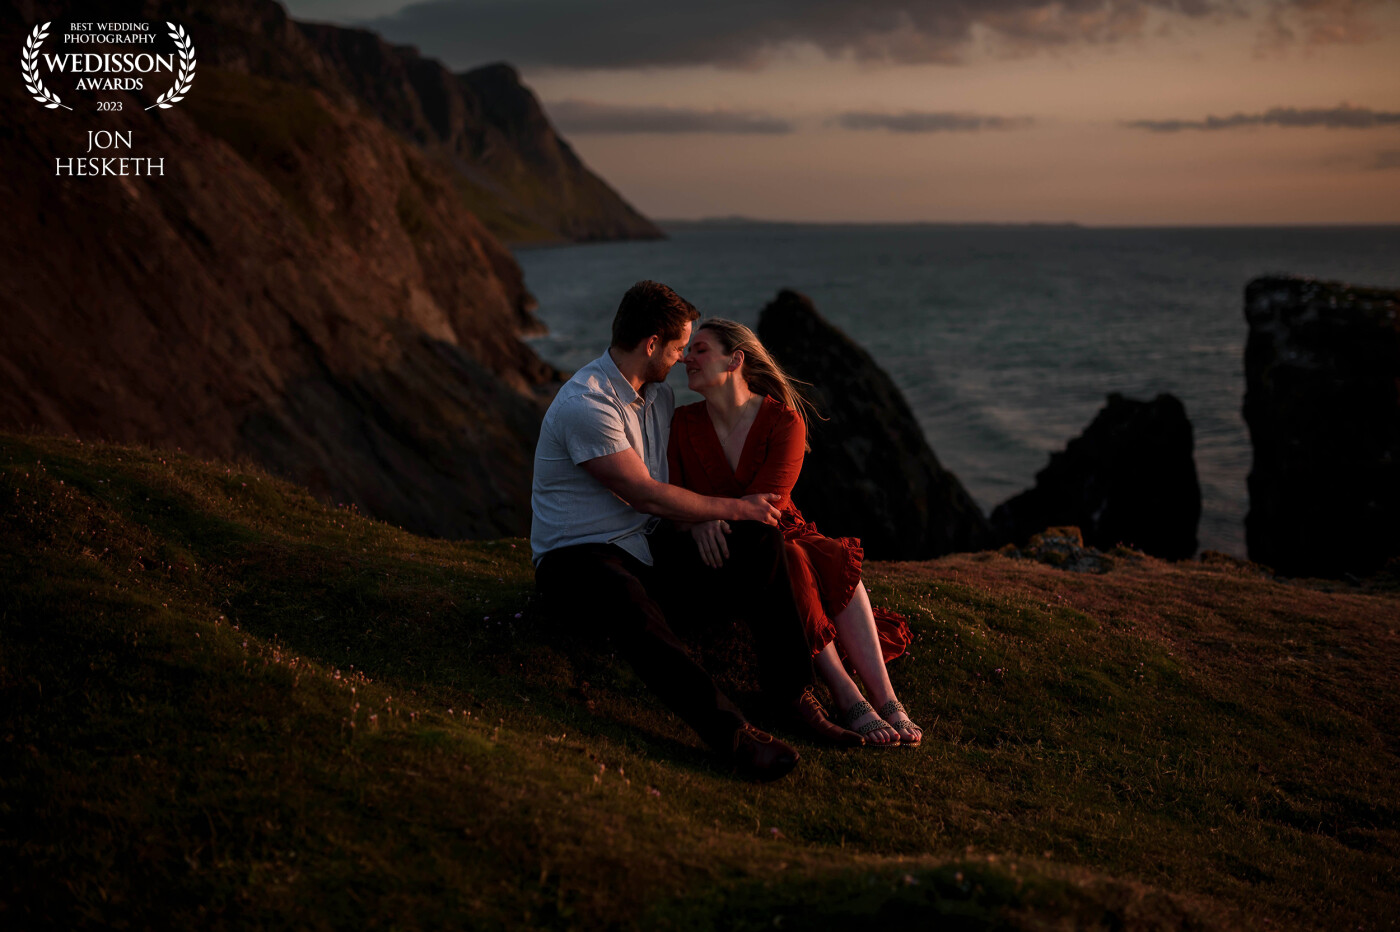 The light, the setting, the beauty of Trefor Stacks. Luke and Emily are such a great couple, thank you for the Award.